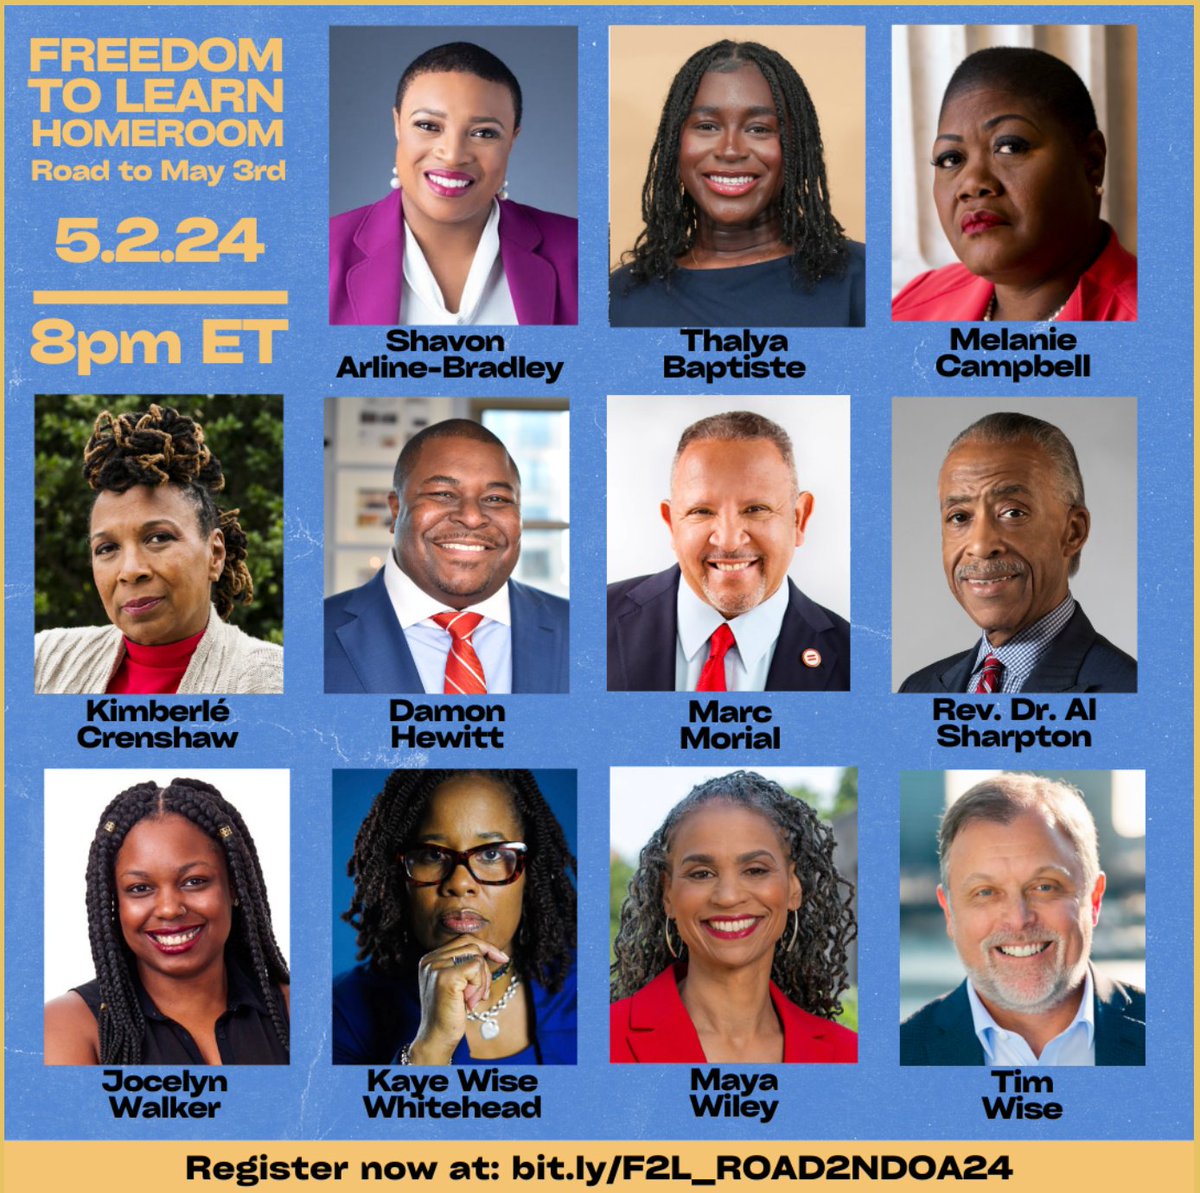 NCNW President and CEO @shavonarline will join @AAPolicyForum for the Freedom to Learn Home Room at 8:00pm ET. In preparation for action on May 3rd in defense of racial justice, education, and democracy. Register here: bit.ly/F2L_ROAD2NDOA24